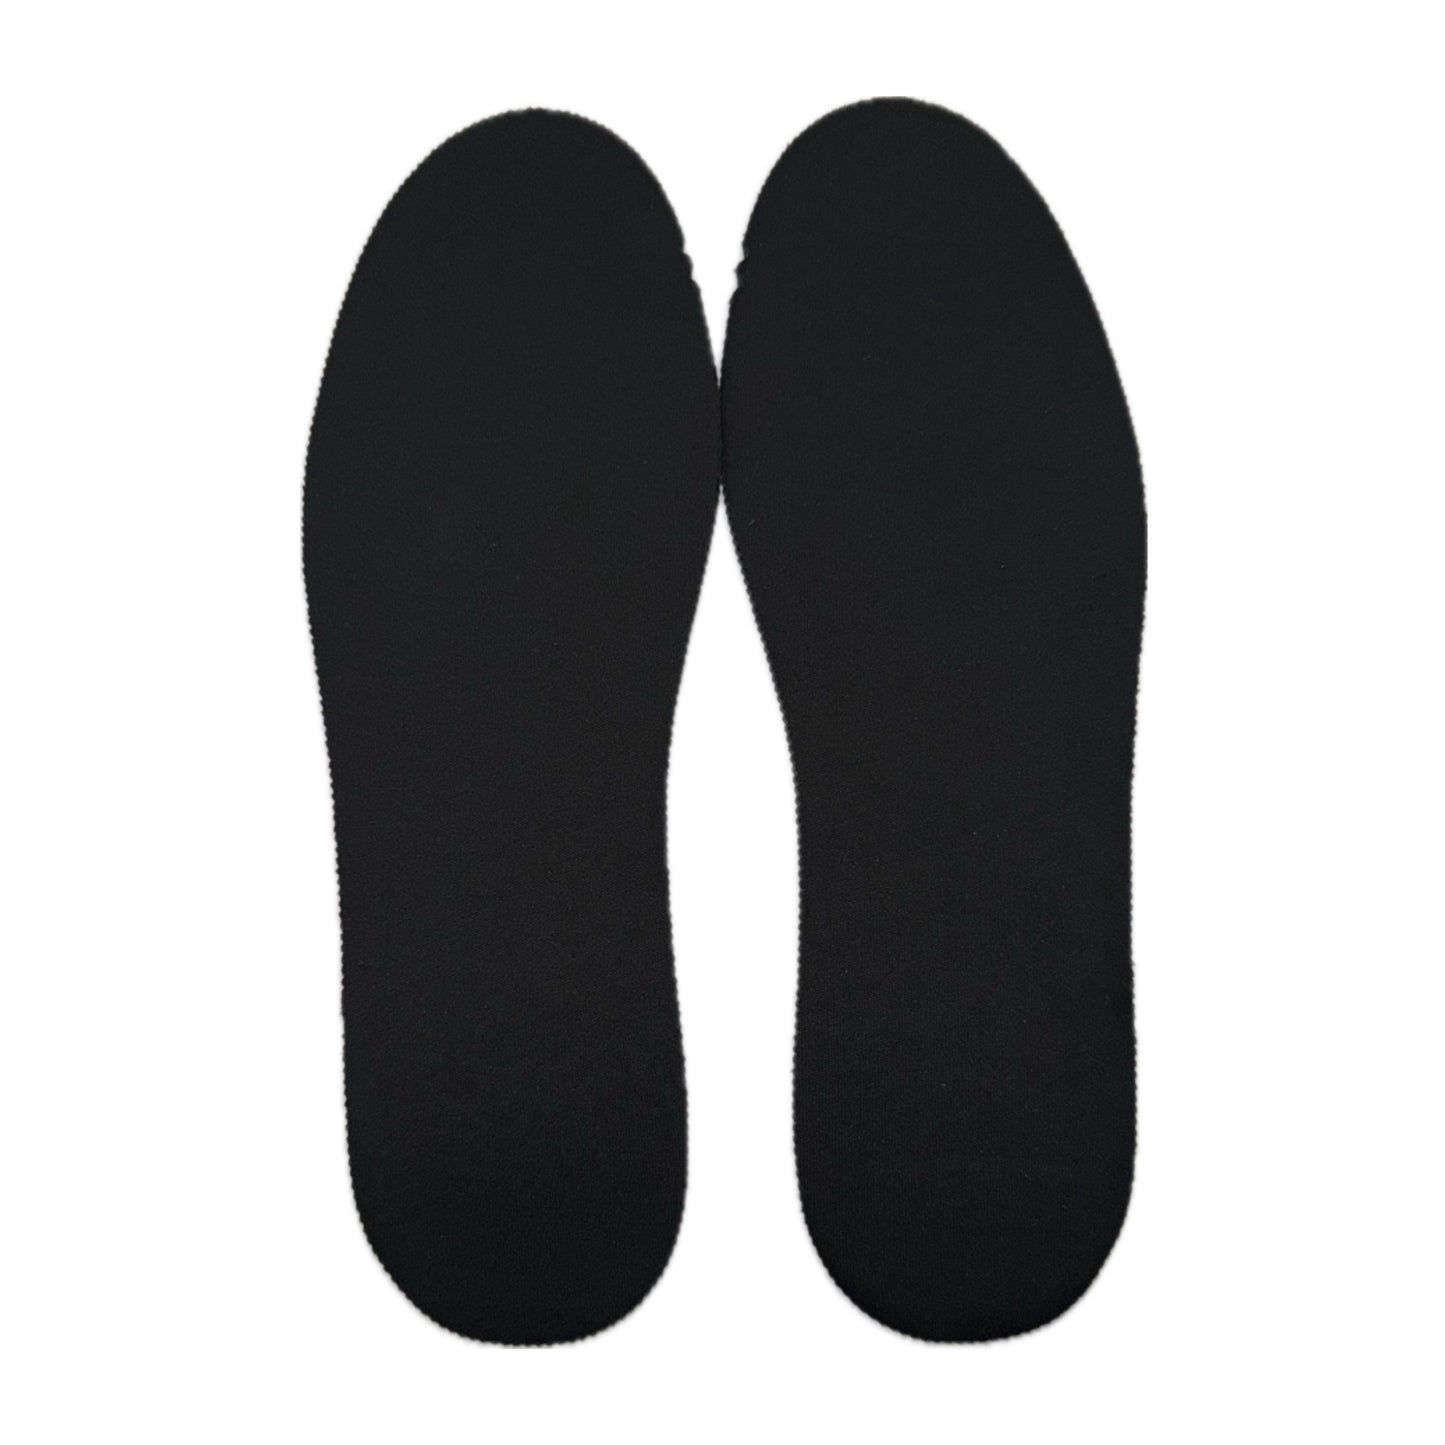 Jett Lite Boots - Replacement Insoles